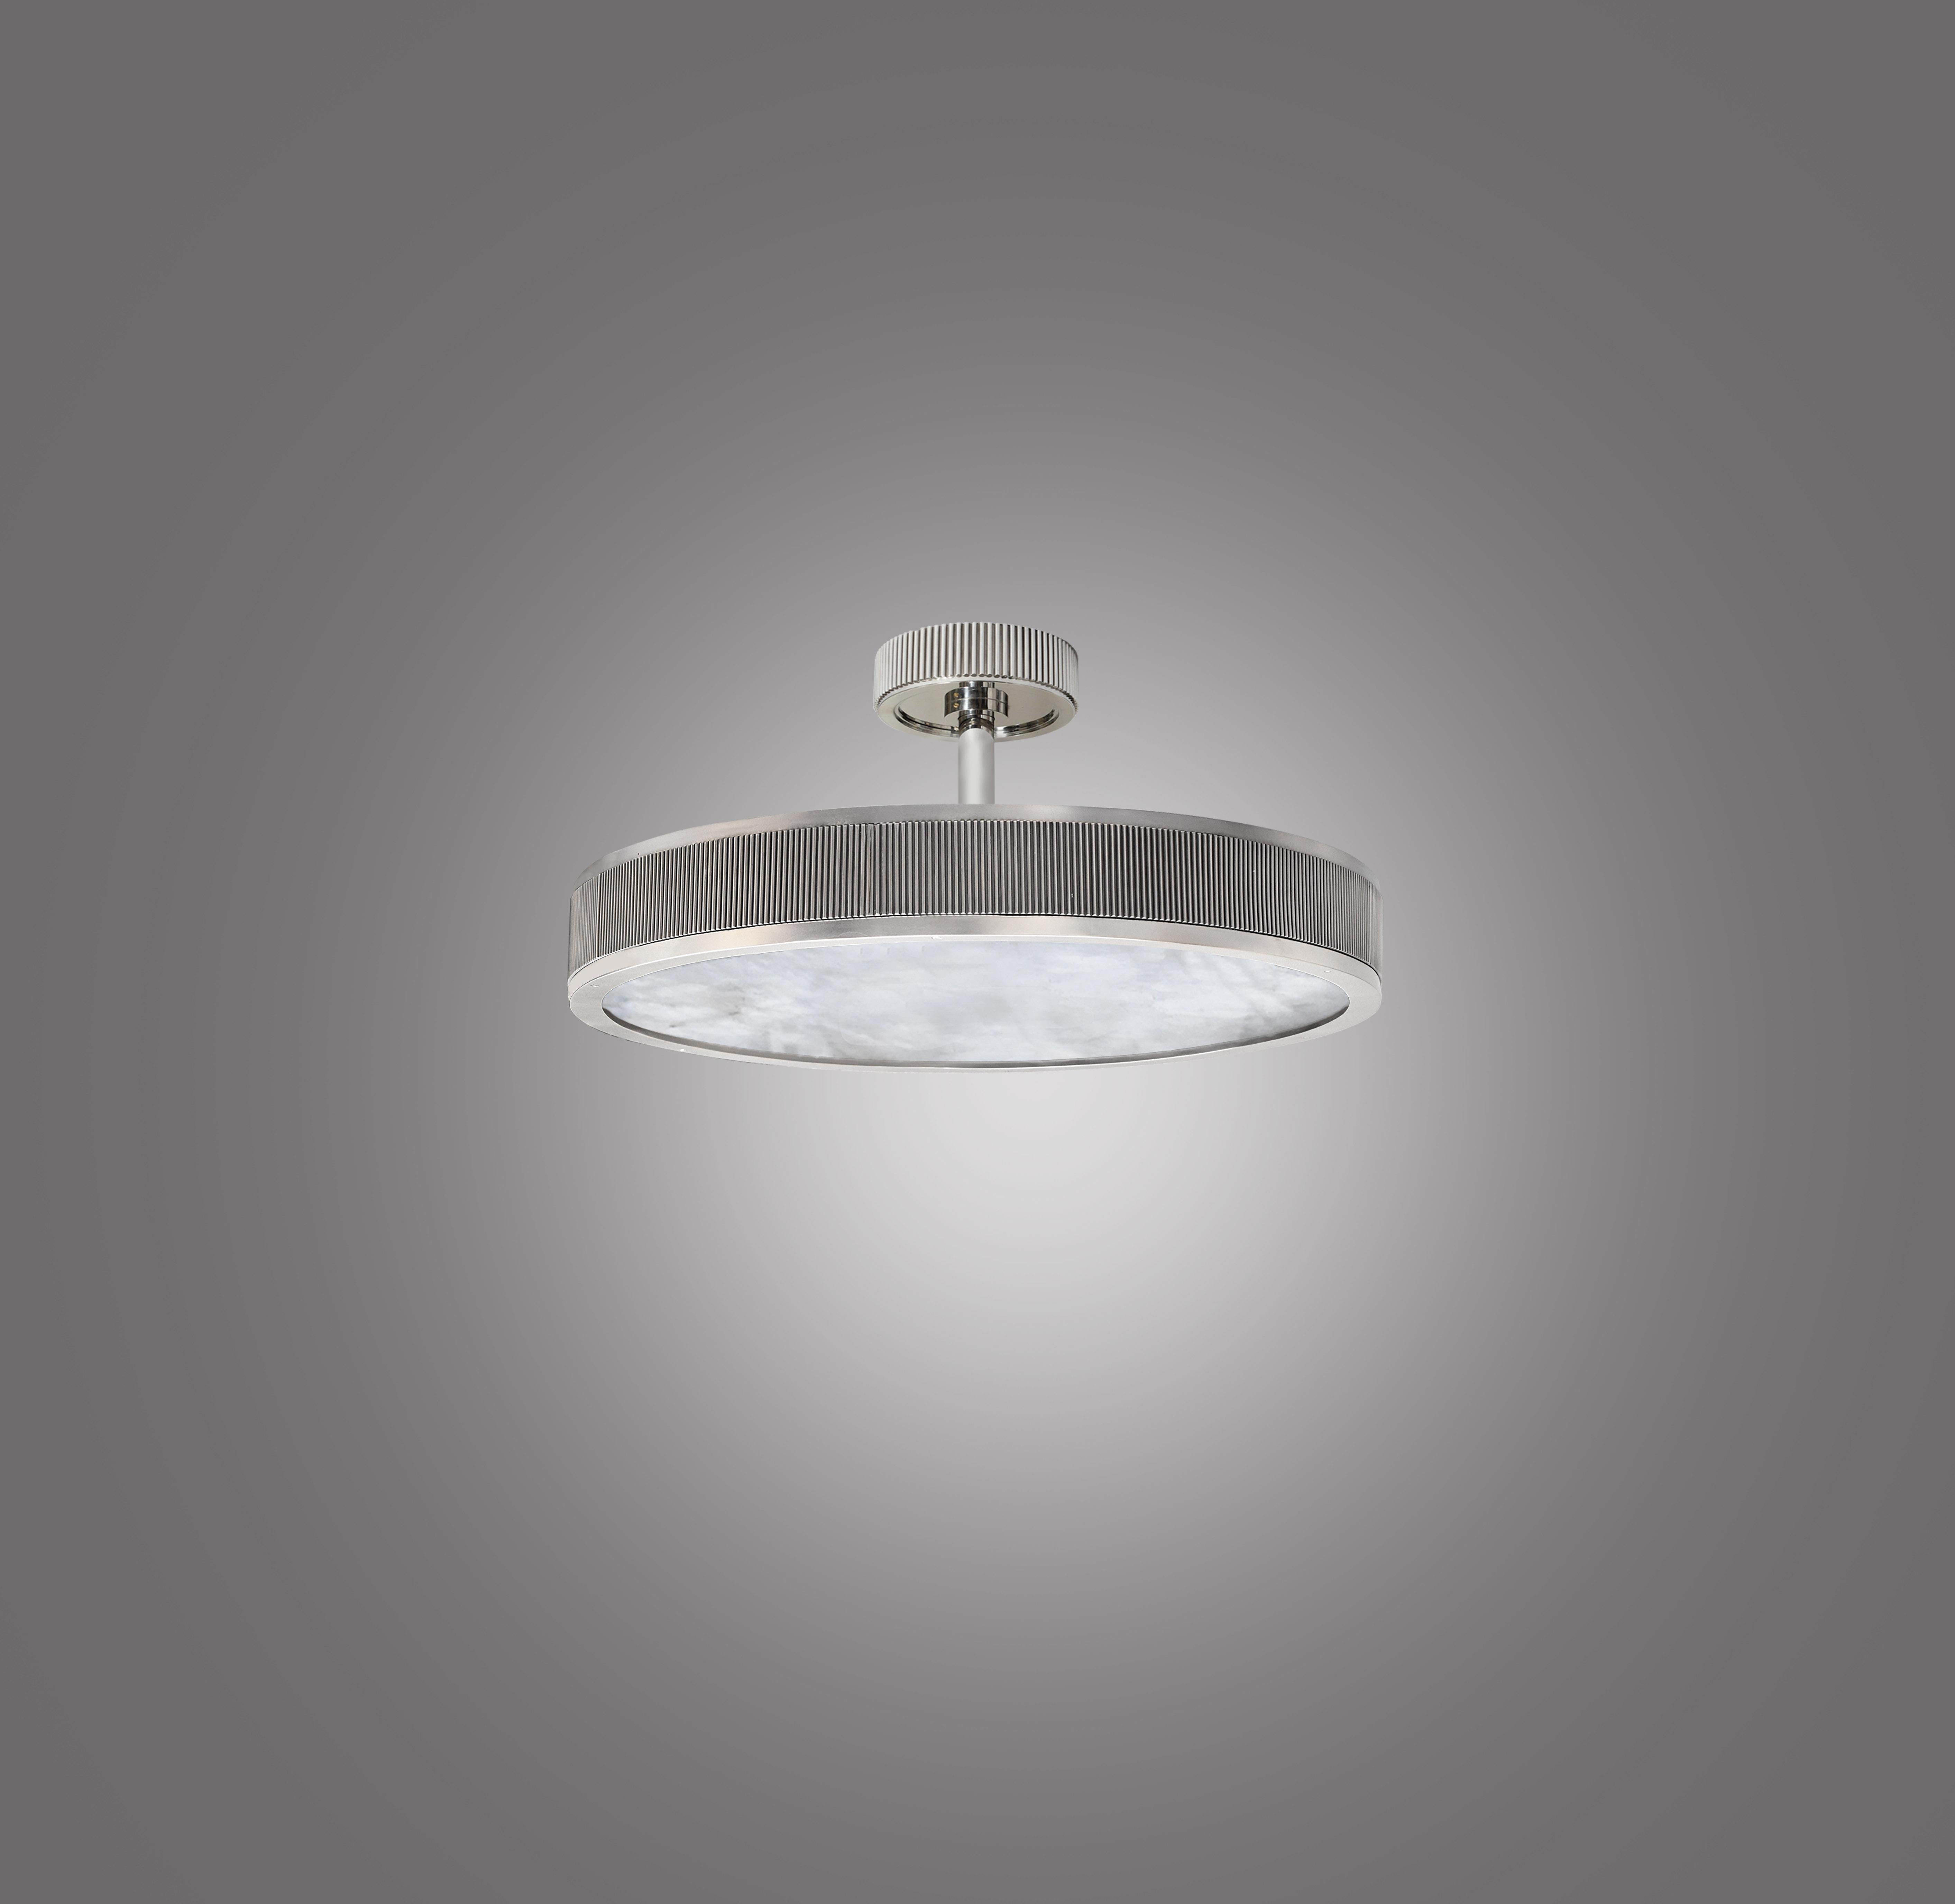 Rock crystal semi flush mount with nickel plating frame. Created by Phoenix Gallery, NYC.
Height can be adjustable.

